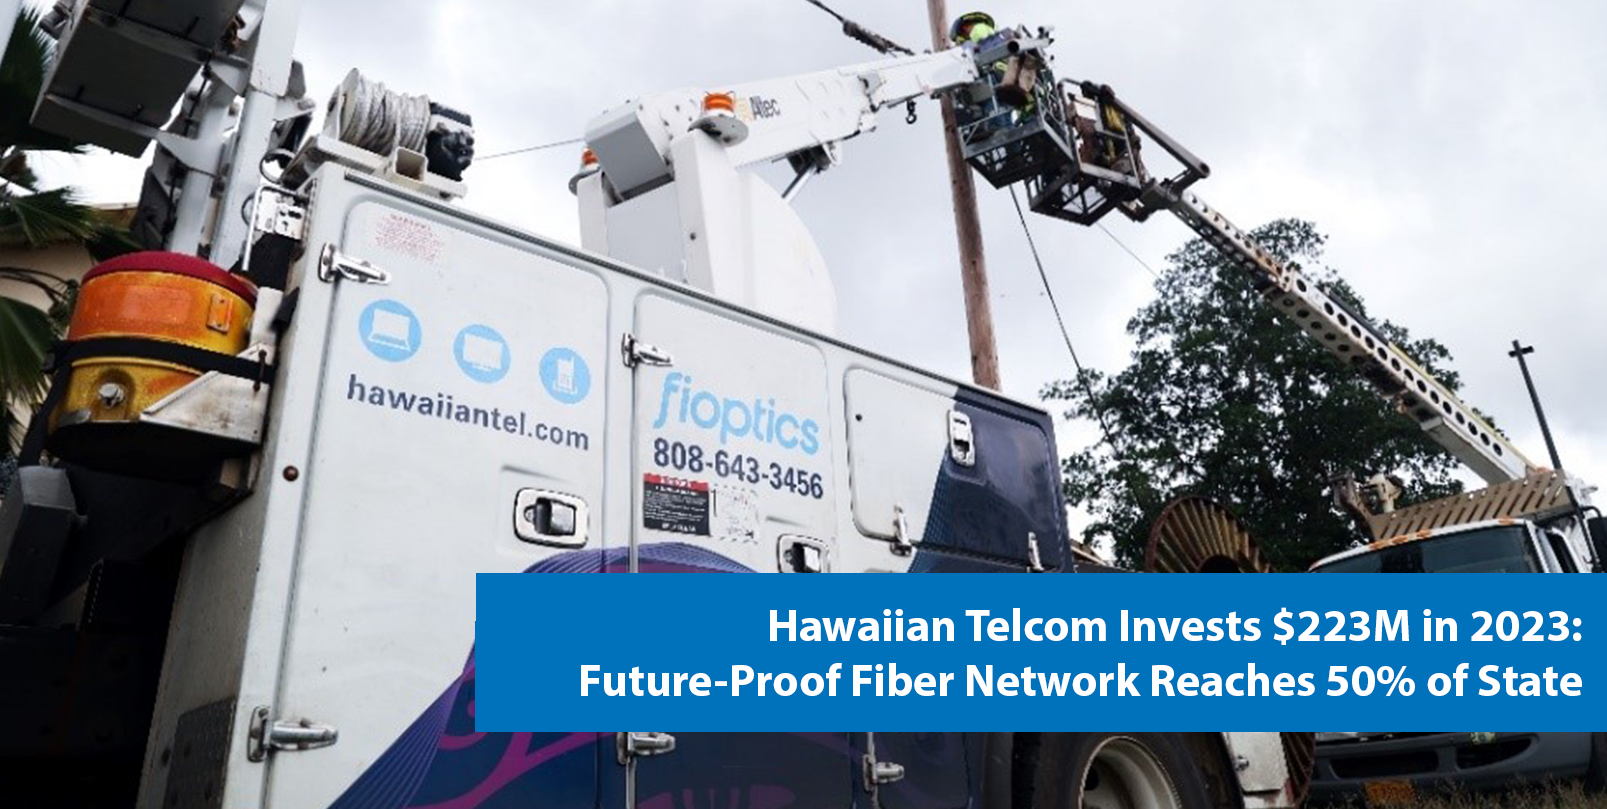 Hawaiian Telcom Invests $223M in 2023: Future-Proof Fiber Network Reaches 50% of State